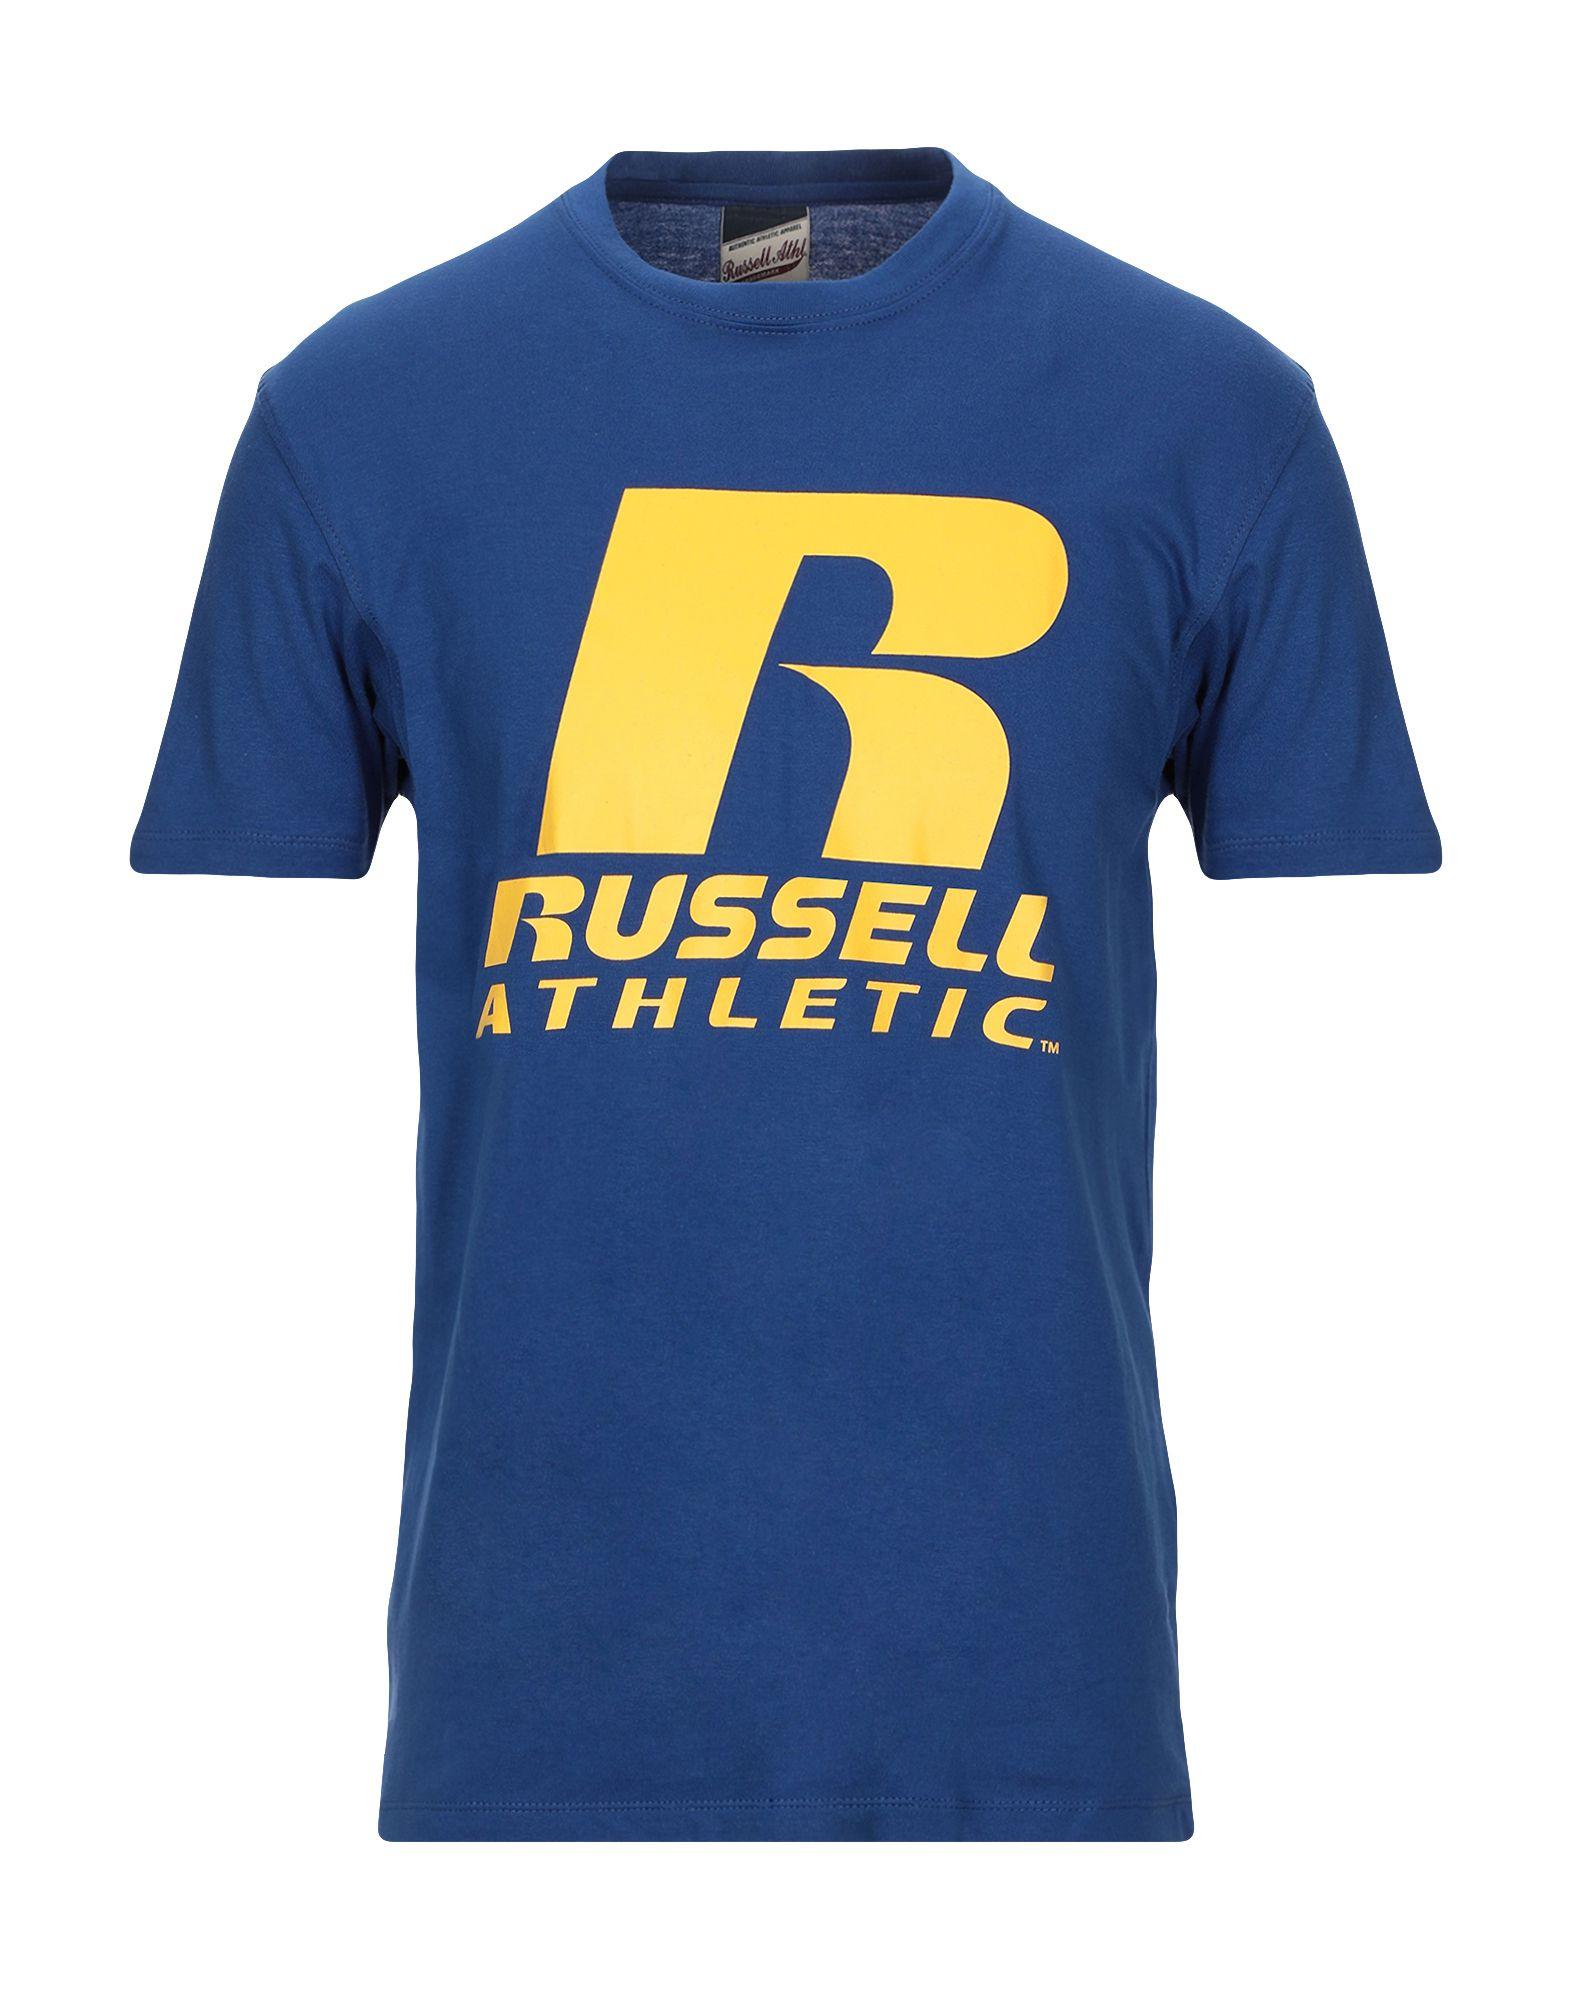 Russell Athletic T-shirt in Blue for Men - Lyst